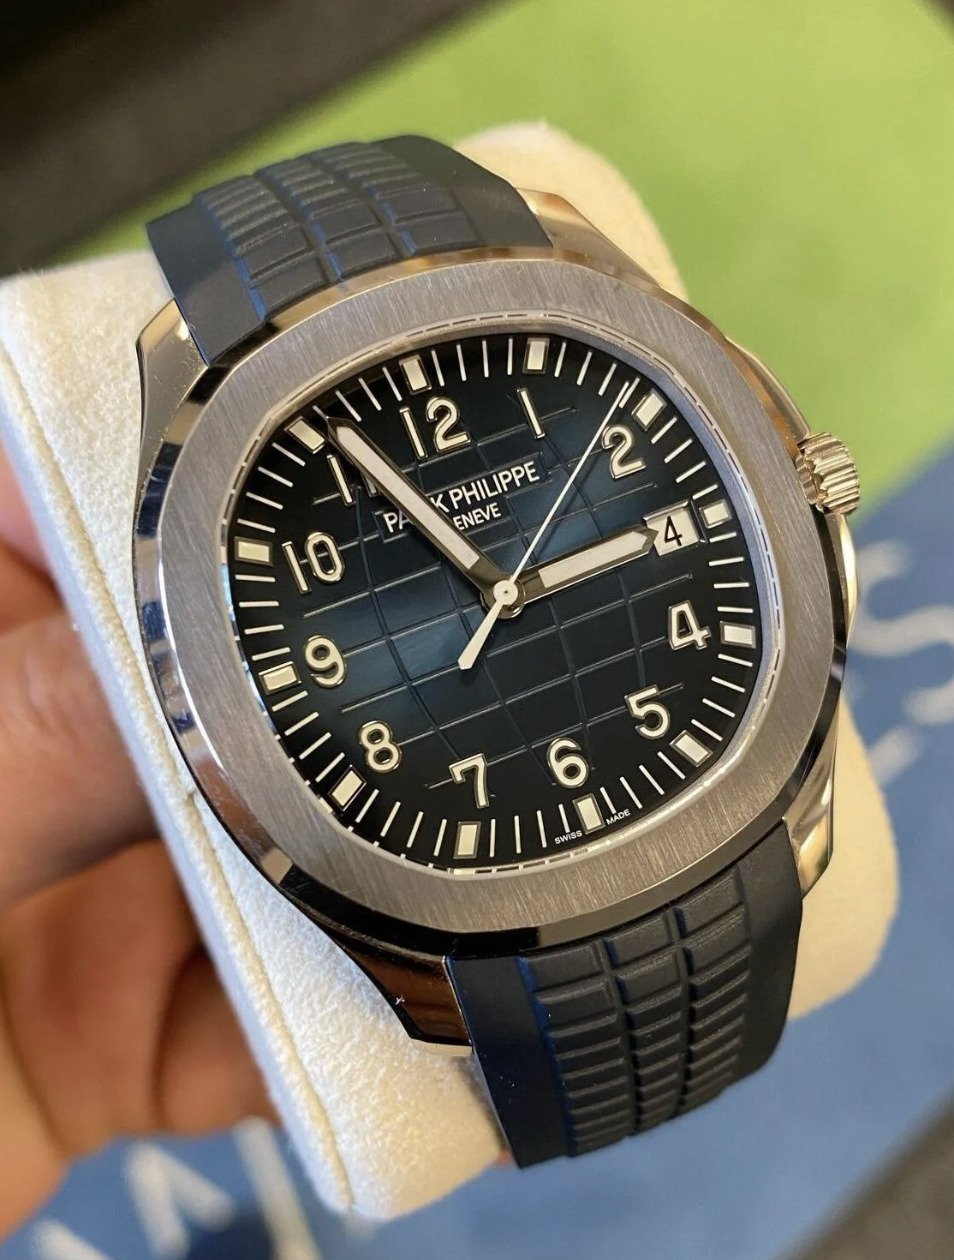 Patek Philippe 5168G Aquanaut Blue Dial and Midnight Blue Strap